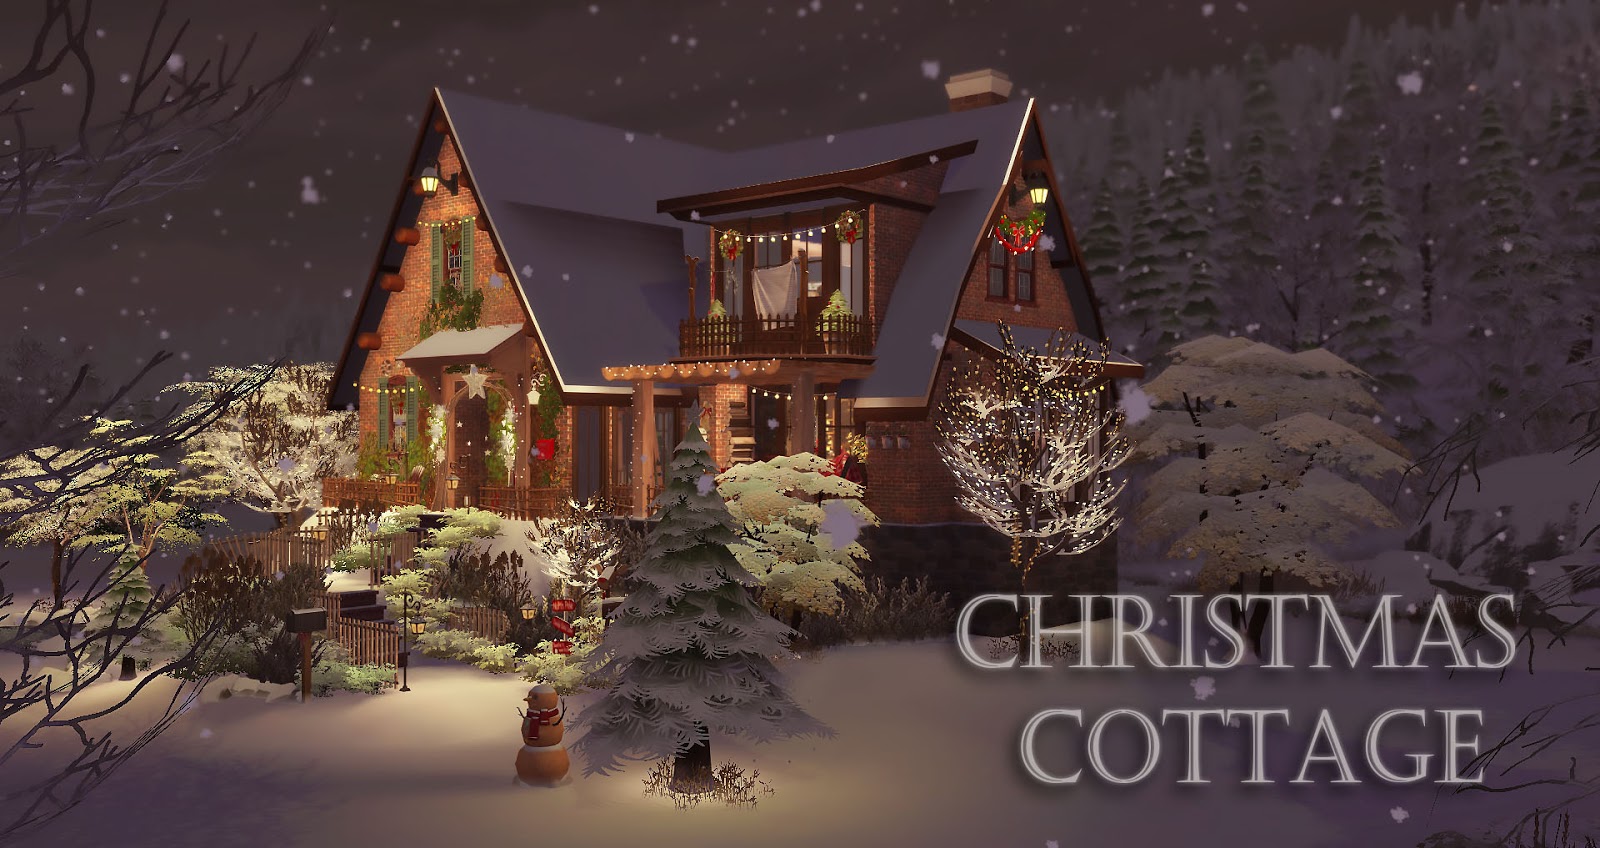 Sims 4 Christmas Cottage 紅色聖誕夜 Ruby S Home Design